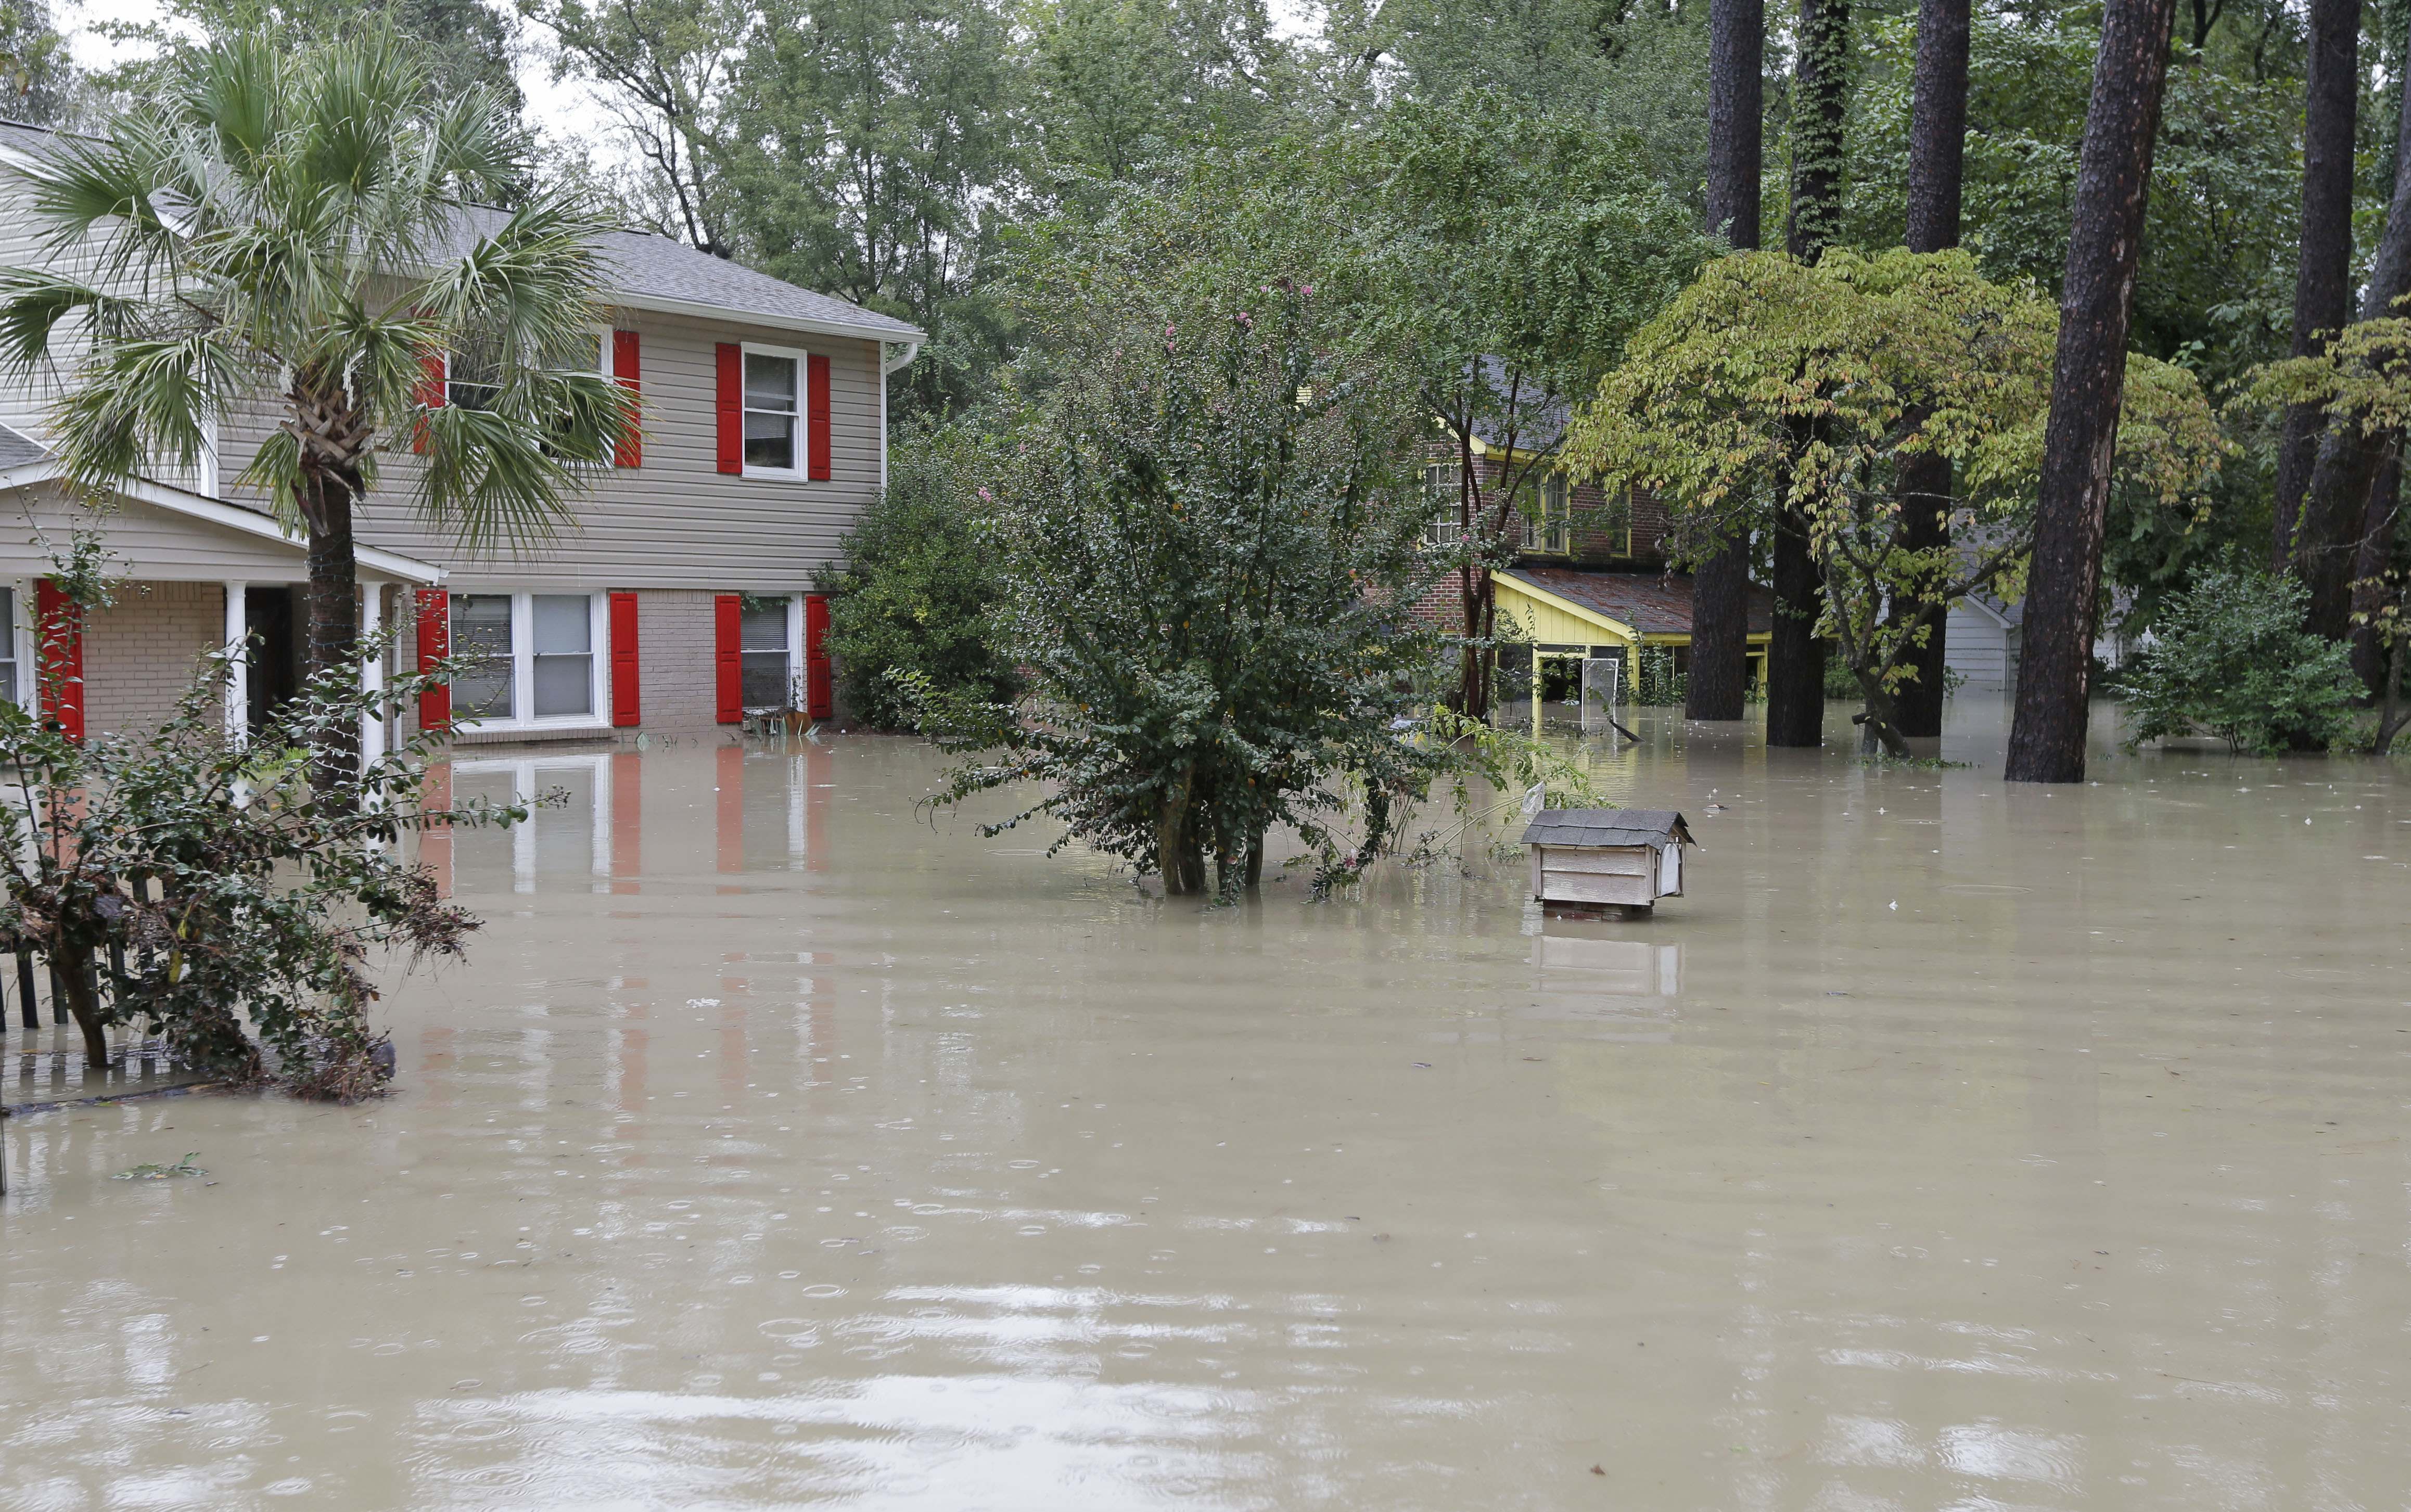 Flood waters climb up the walls of homes in Columbia, S.C., Sunday, Oct. 4, 2015.